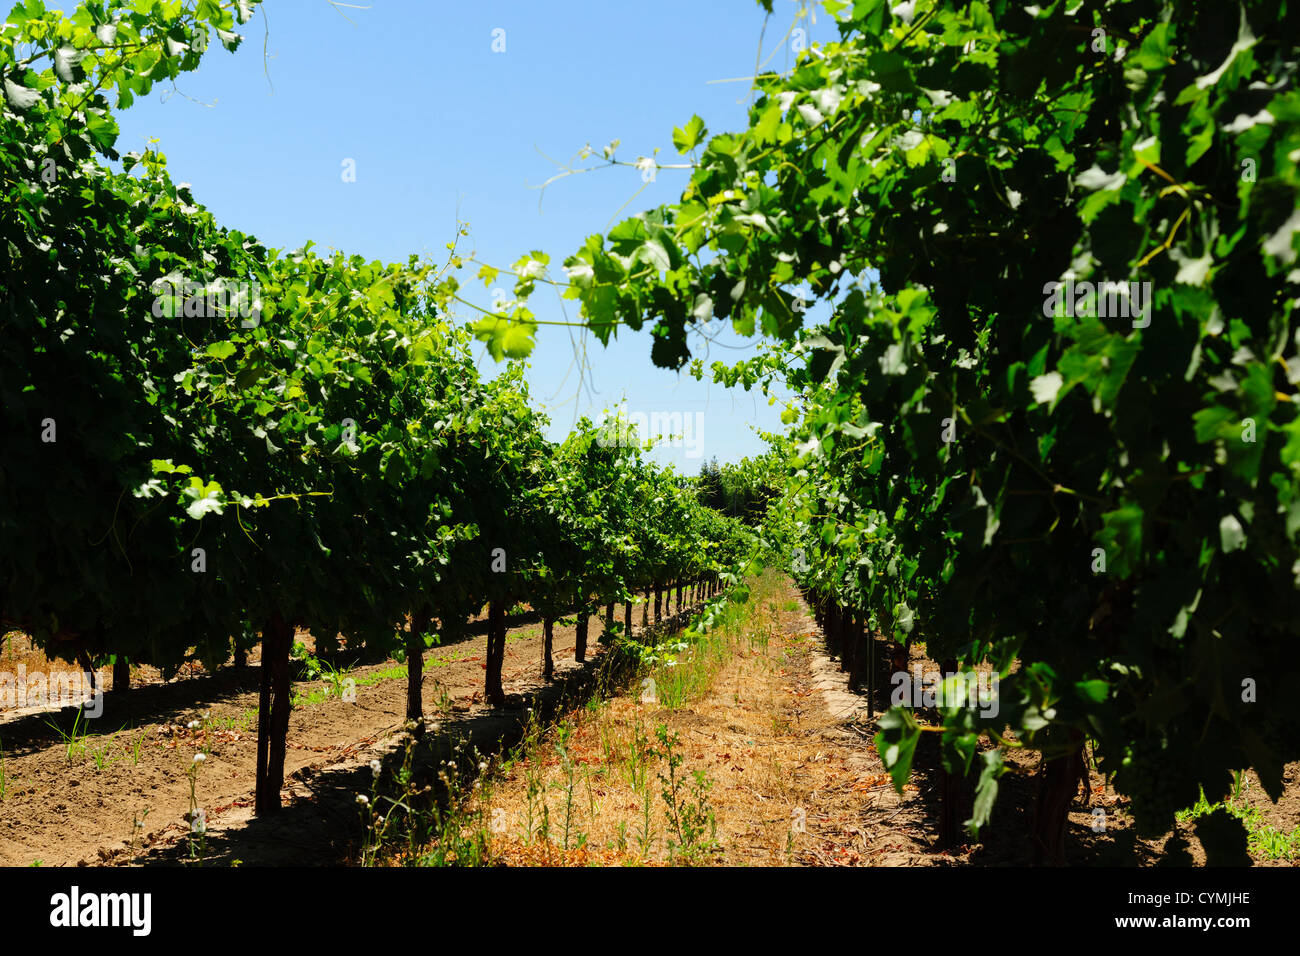 Lodi, inland from San Francisco, a small town in a wine growing area. Vines. Stock Photo